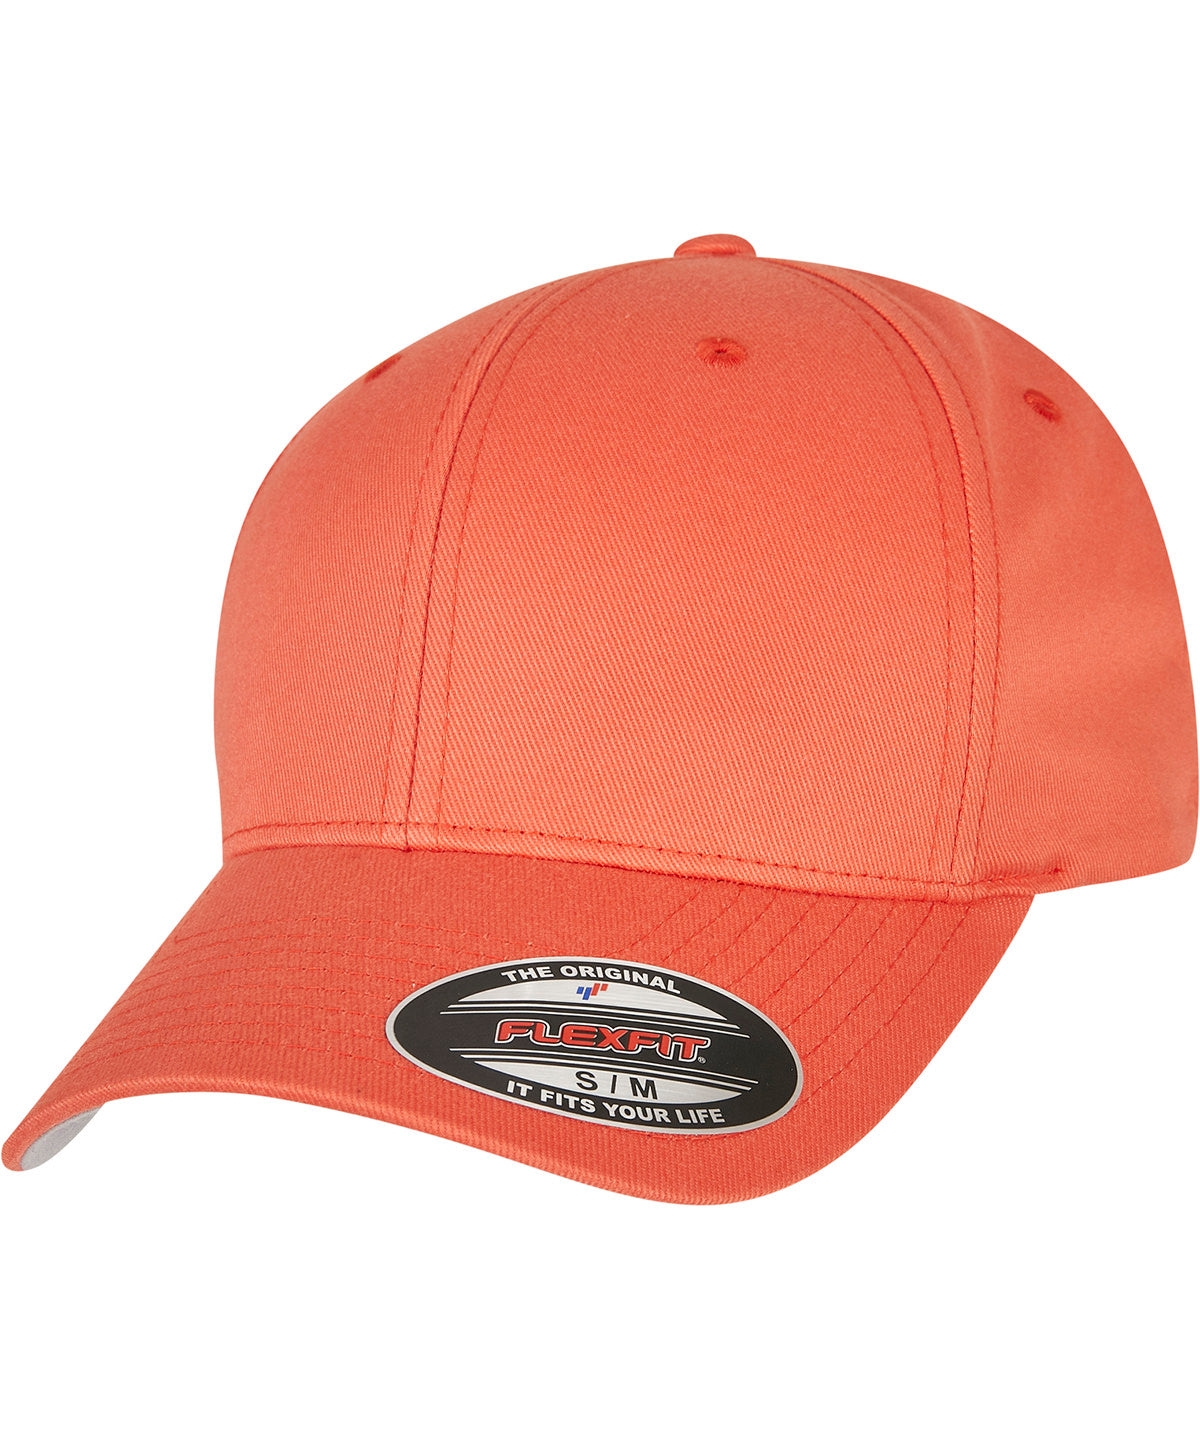 Spicy Orange - Flexfit fitted baseball cap (6277) Caps Flexfit by Yupoong 2022 Spring Edit, Headwear, Must Haves, New Colours for 2023, Rebrandable, Summer Accessories Schoolwear Centres